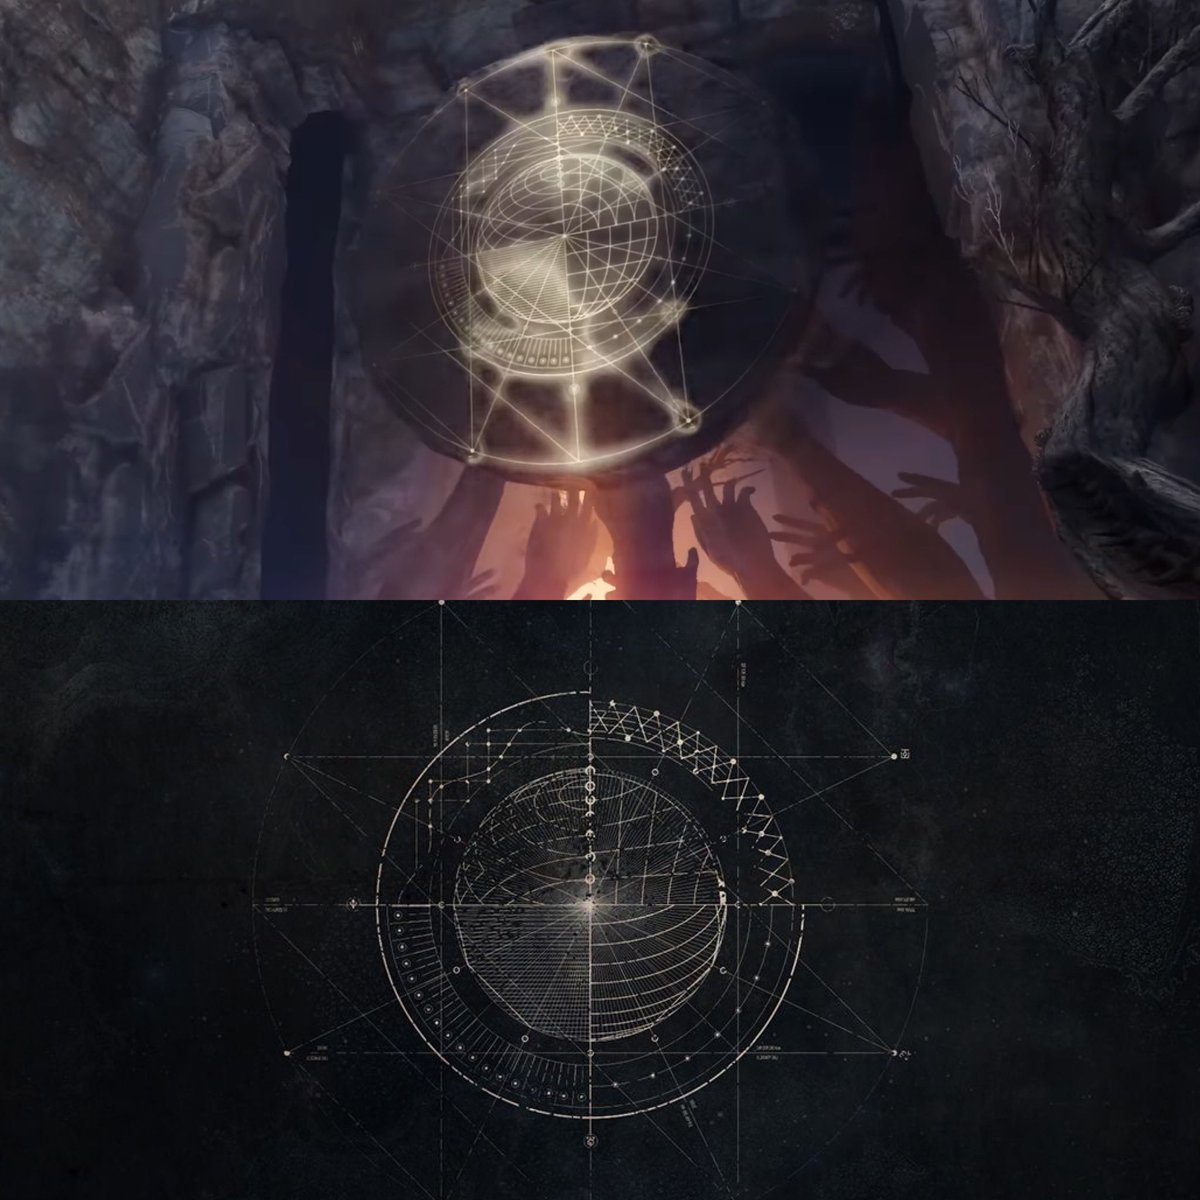 Seeing this particular geometric art and immediately realizing it’s from Destiny 1, Was such a fanboy moment. 

We’ve come full circle. 10 years.